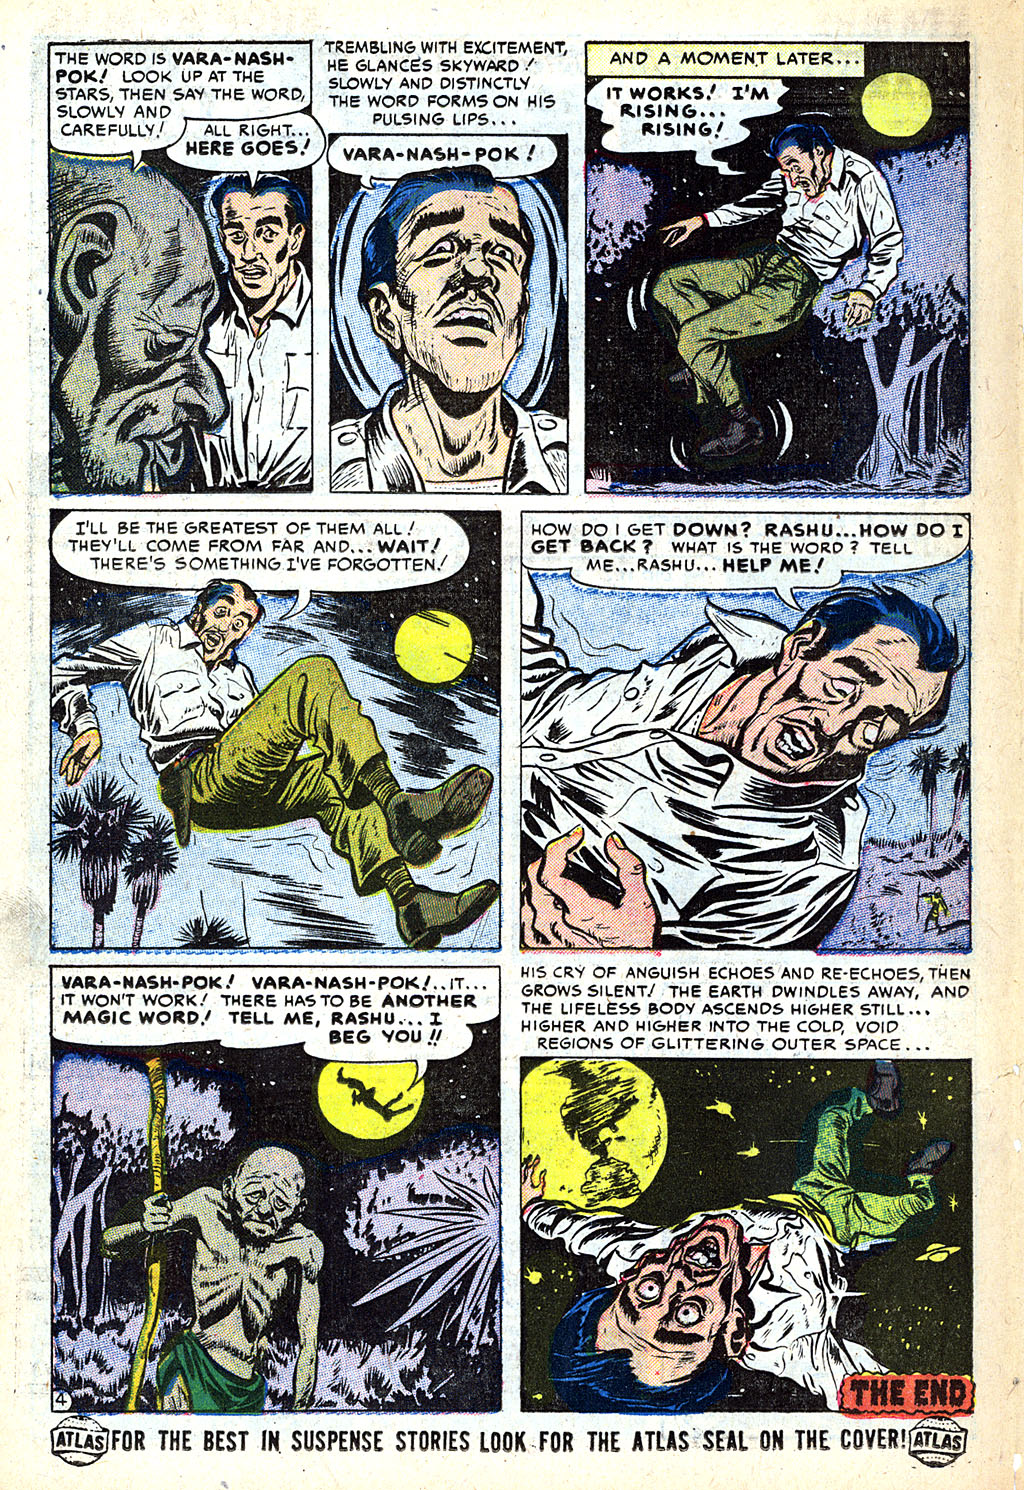 Marvel Tales (1949) 118 Page 25